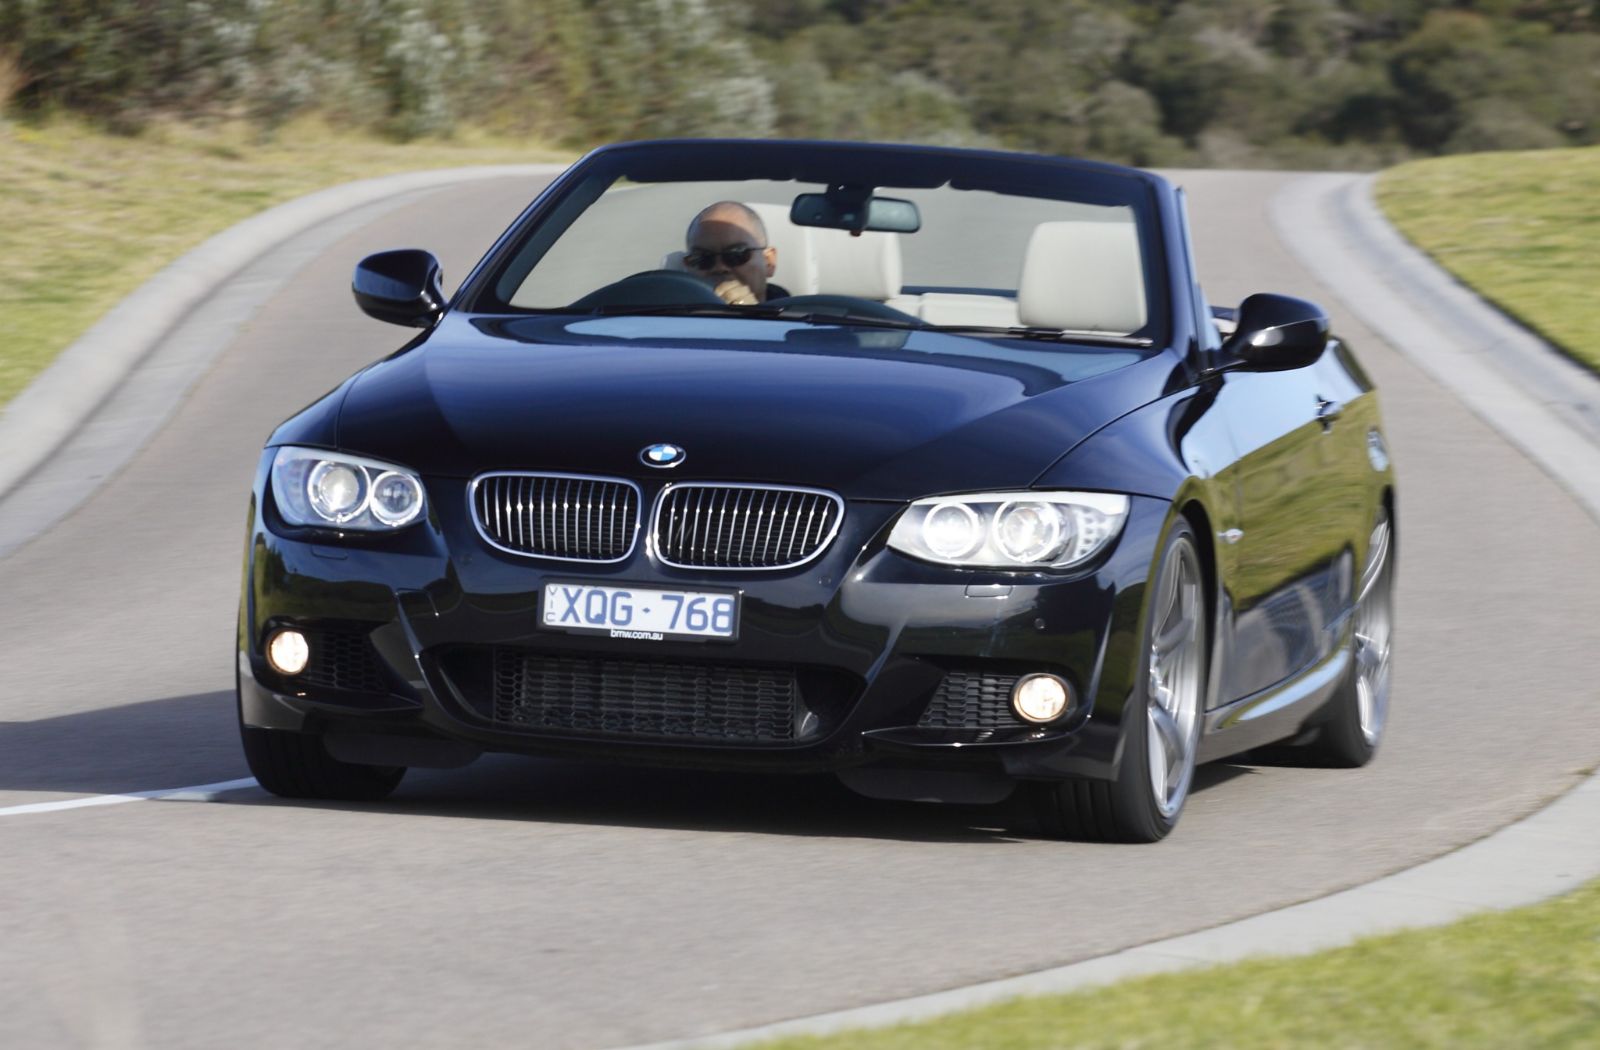 5 Reasons Why the E93 BMW 3 Series Is the Best Used Convertible